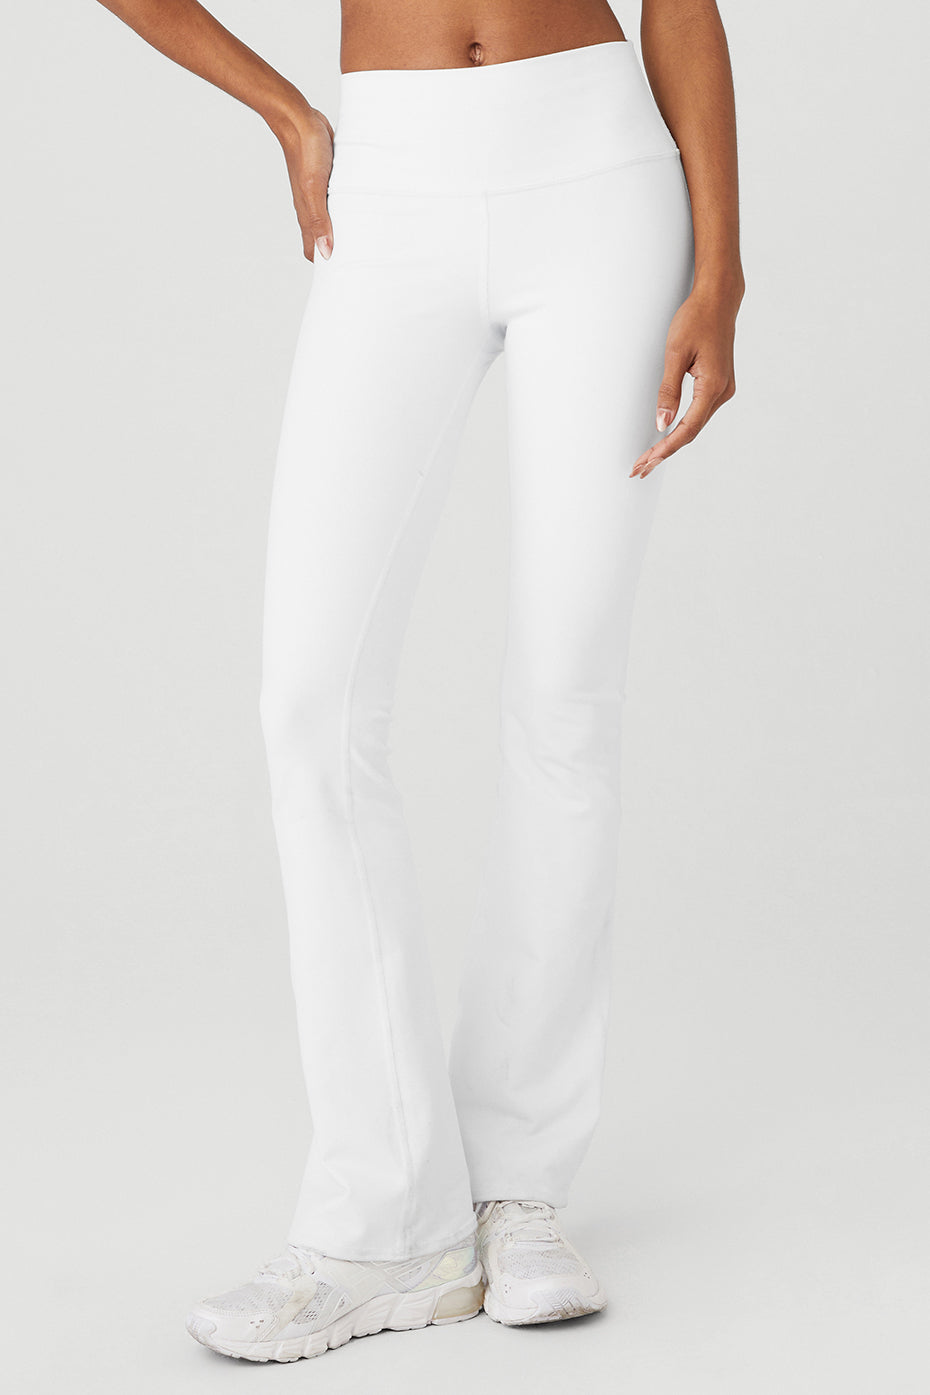 Best High Waisted White Legging: Alo Yoga High-Waist Moto Legging, The 7  Best White Leggings For Workouts and Everyday Wear